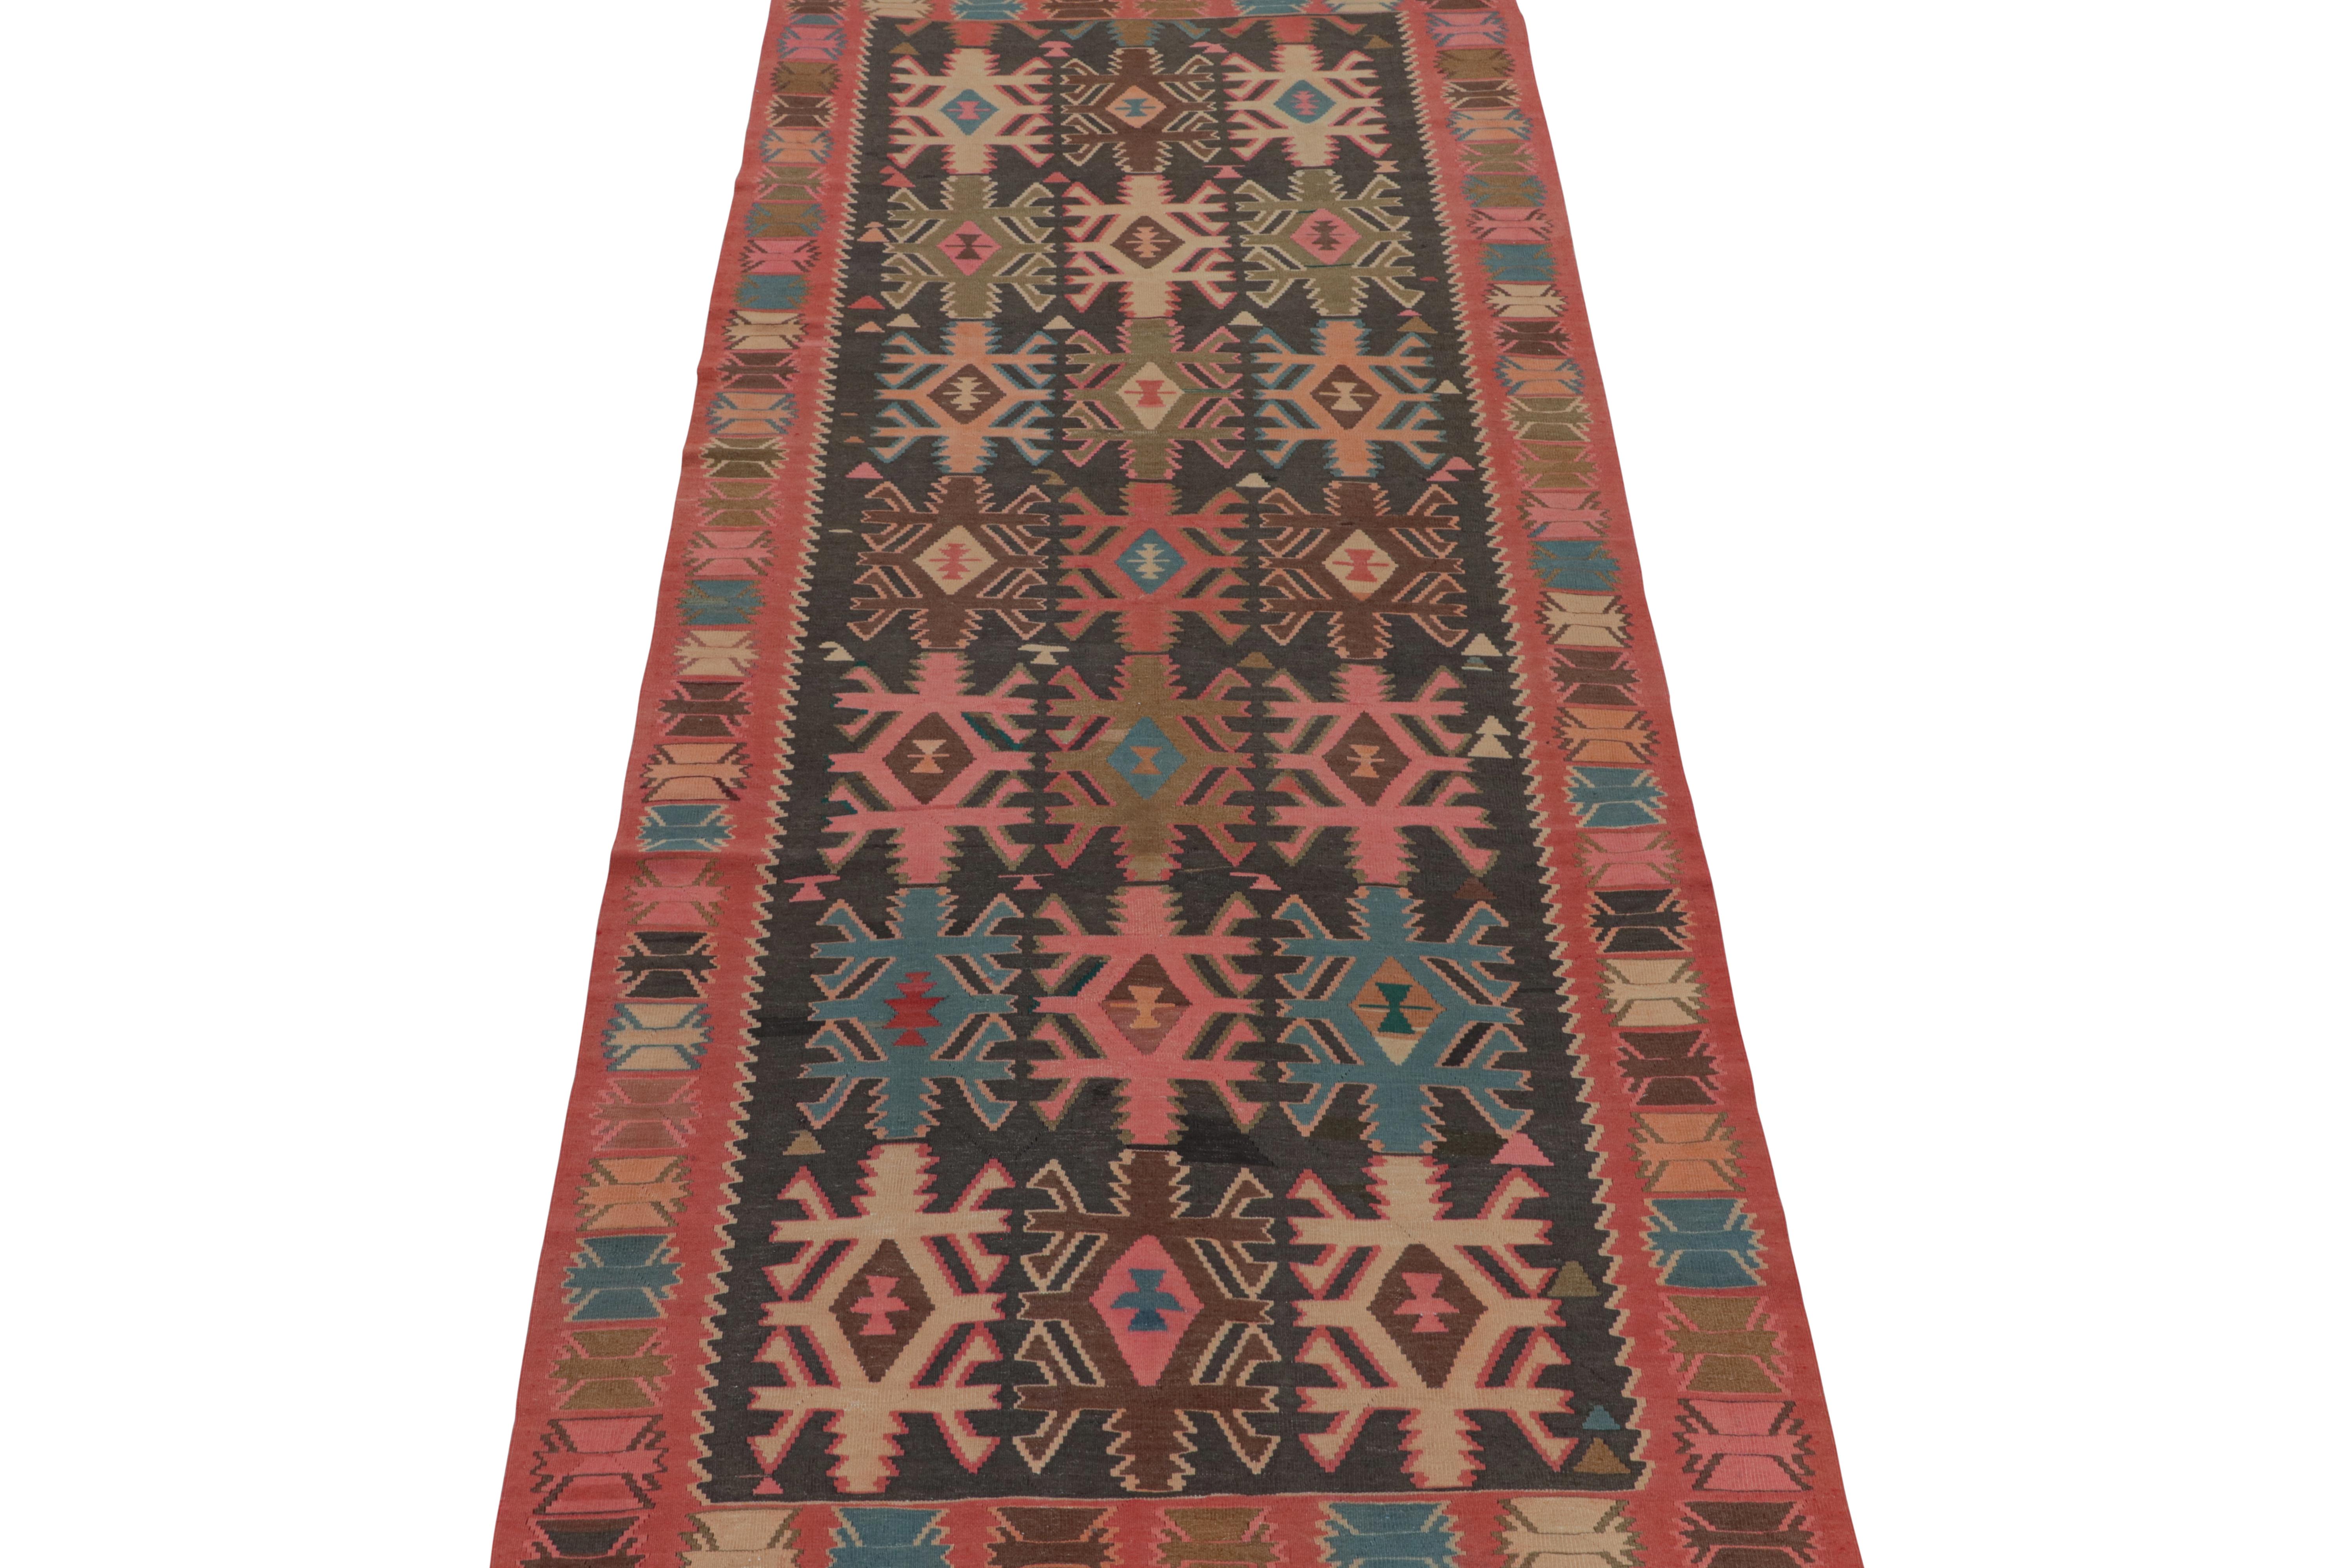 This vintage 5x13 Persian Kilim is a tribal rug from Meshkin—a small northwestern village known for its fabulous works. Handwoven in wool, it originates circa 1950-1960.

Further on the Design:

The bold design prefers a black field and salmon red